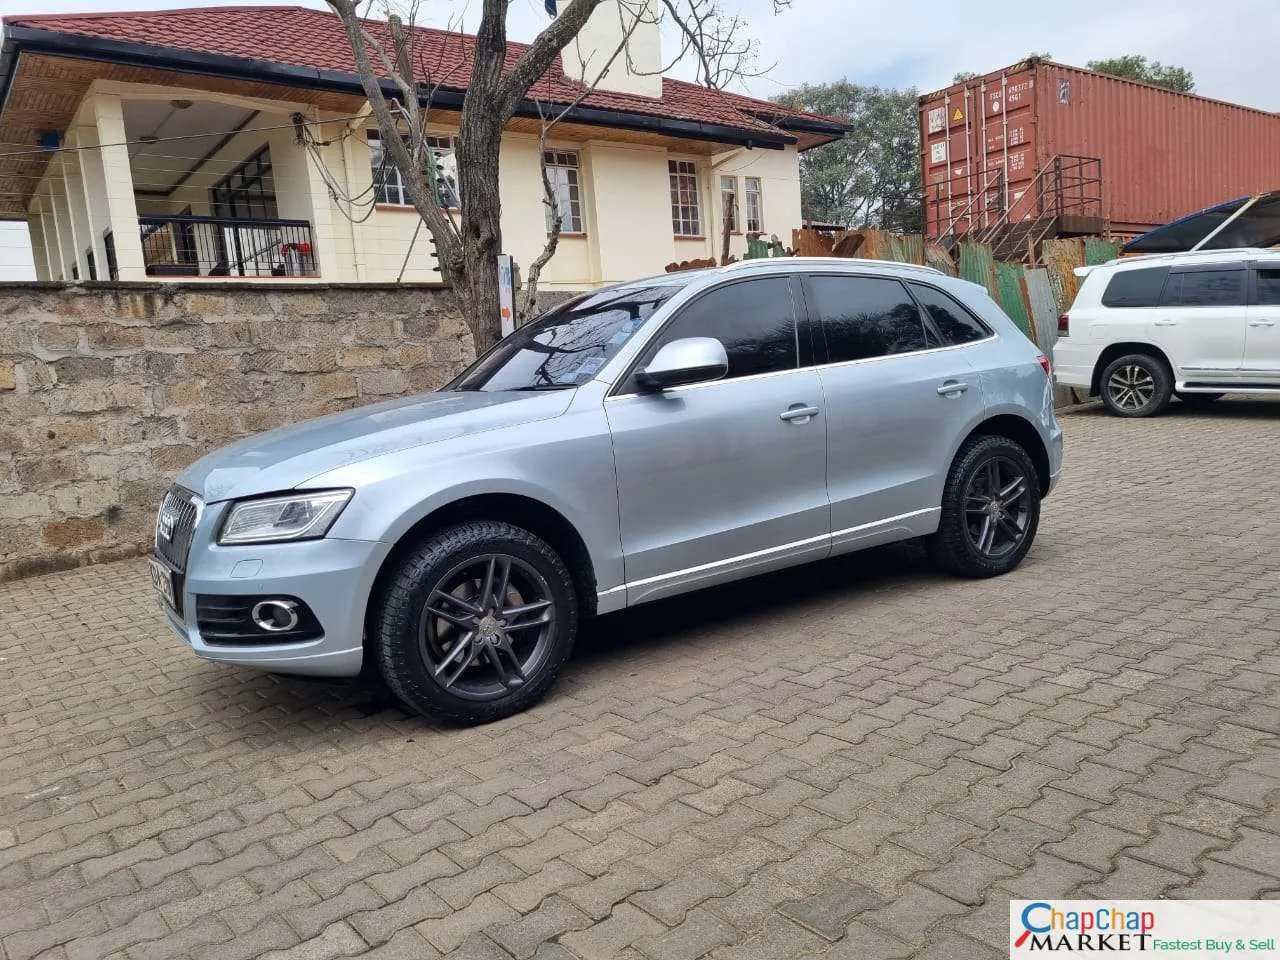 AUDI Q5 QUICK SALE You Pay 30% deposit Trade in Ok EXCLUSIVE AUDI Q5:for sale in kenya hire purchase installments